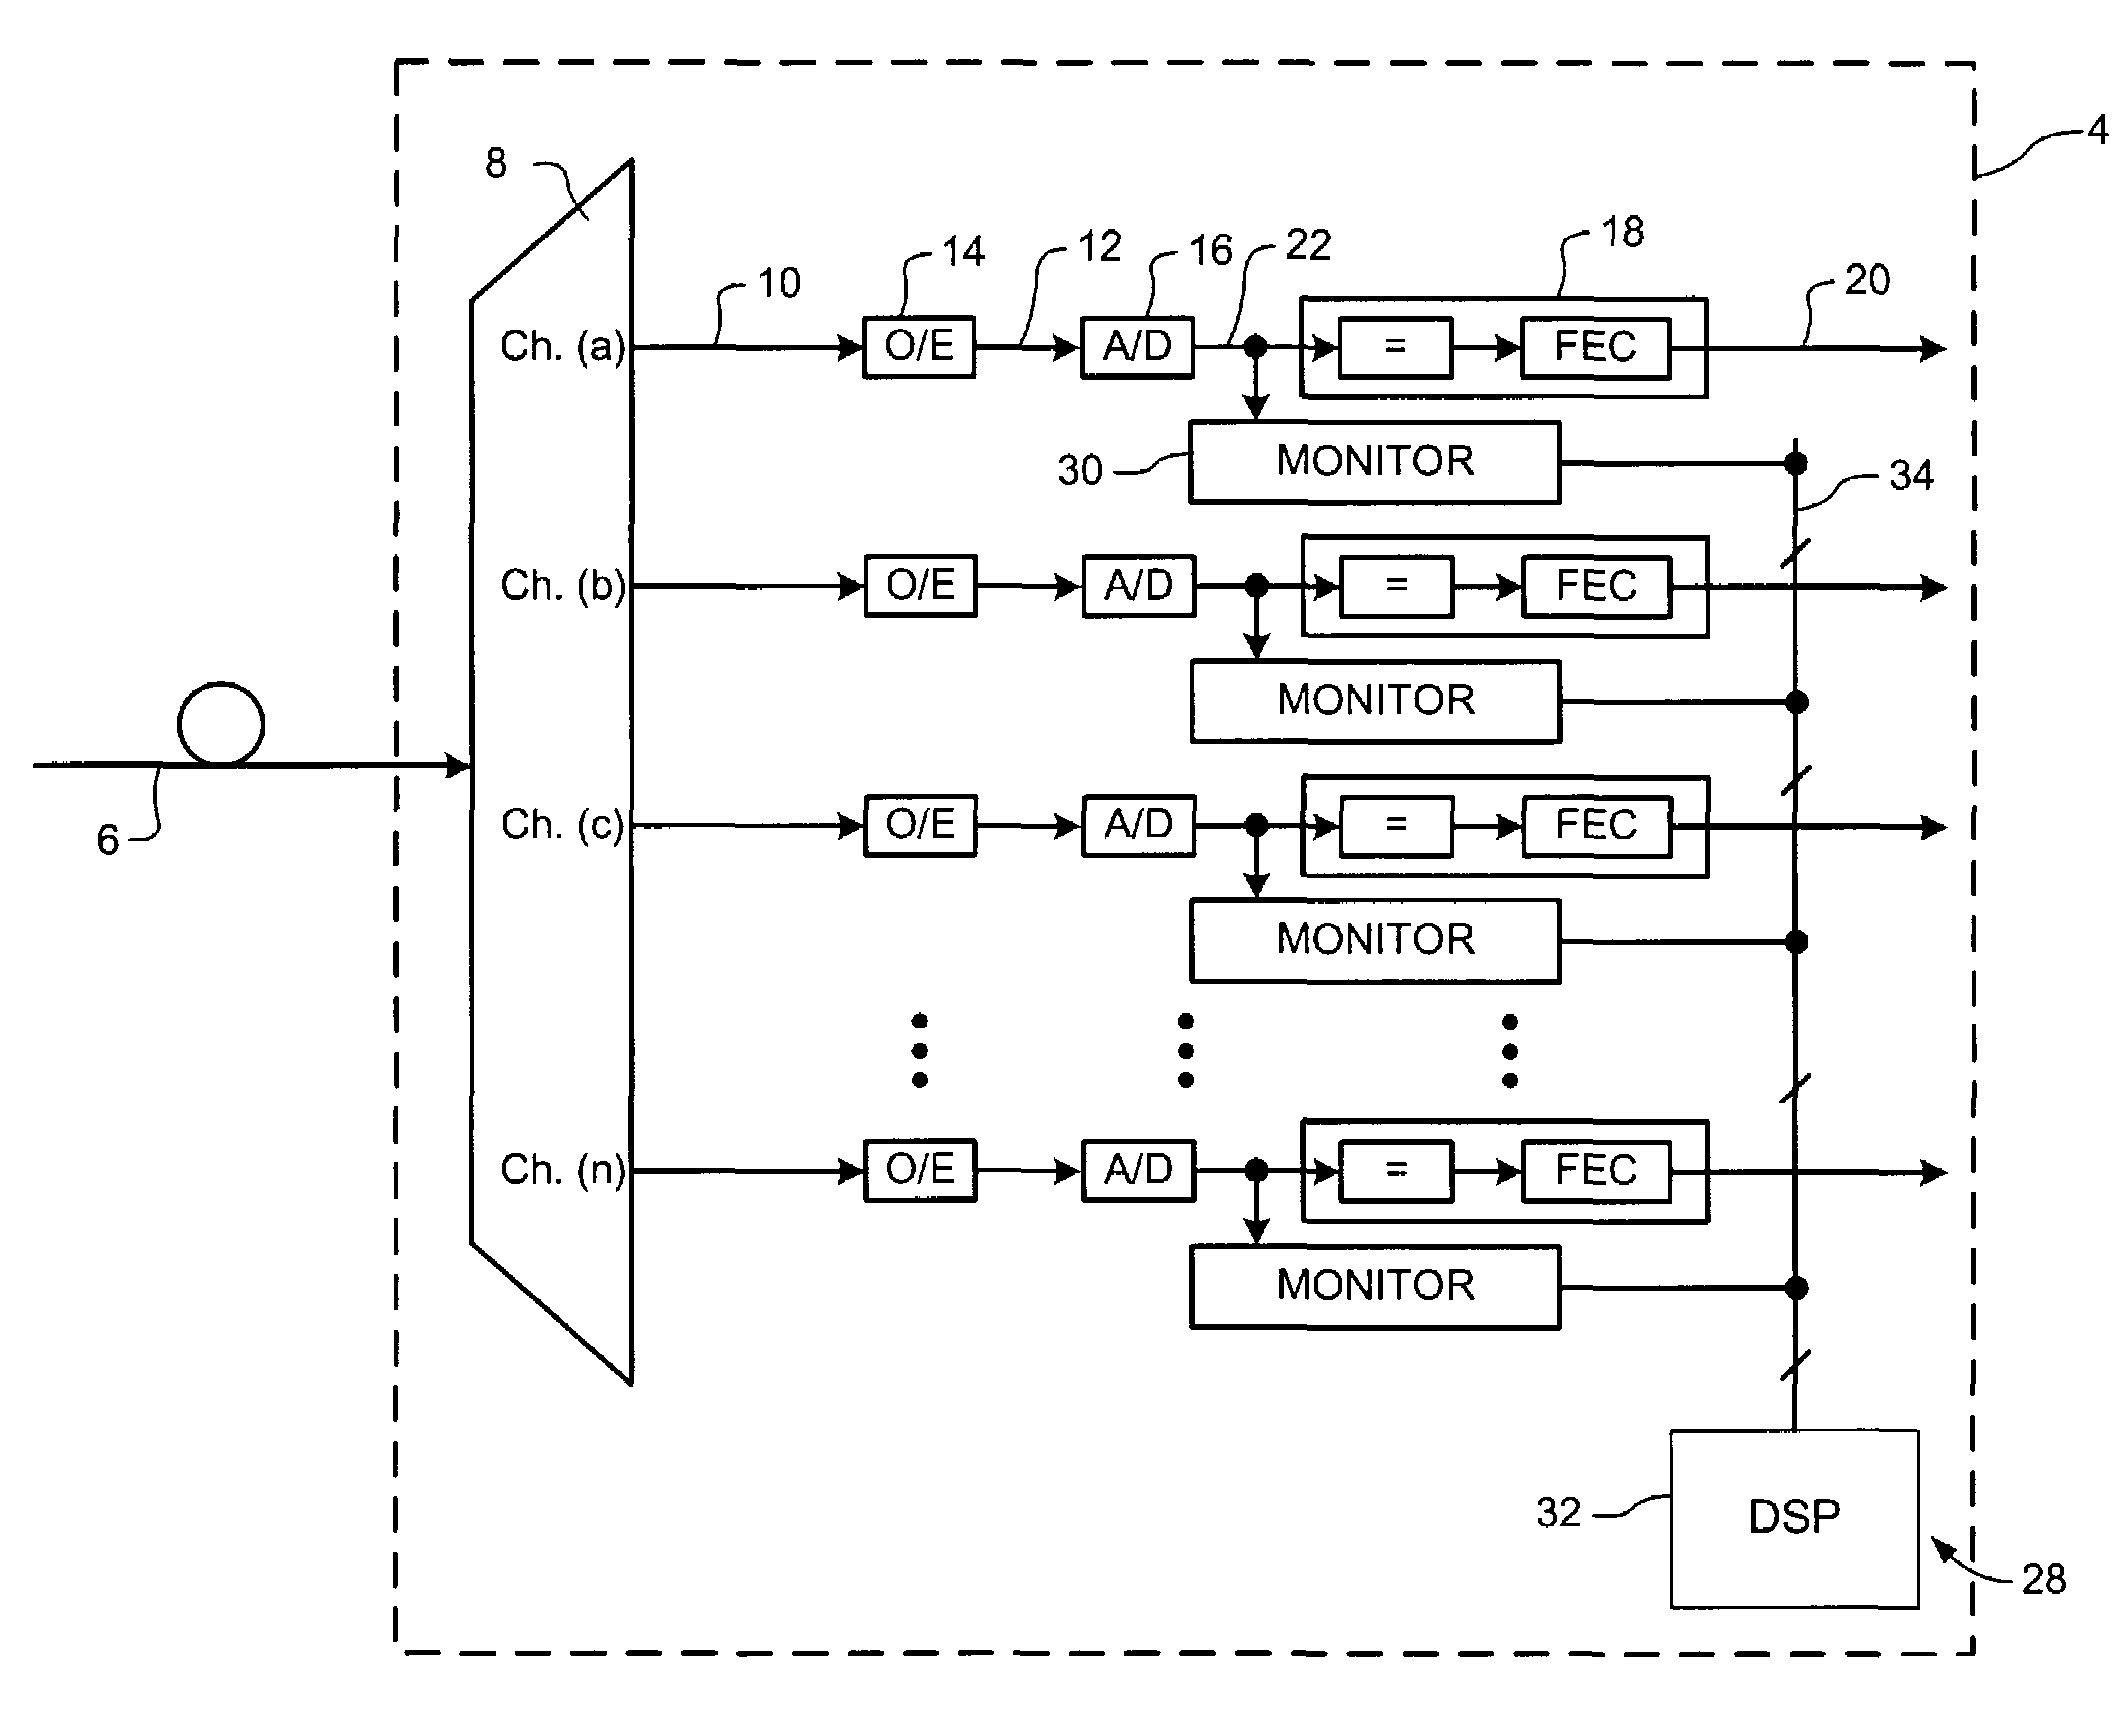 Digital performance monitoring for an optical communications system